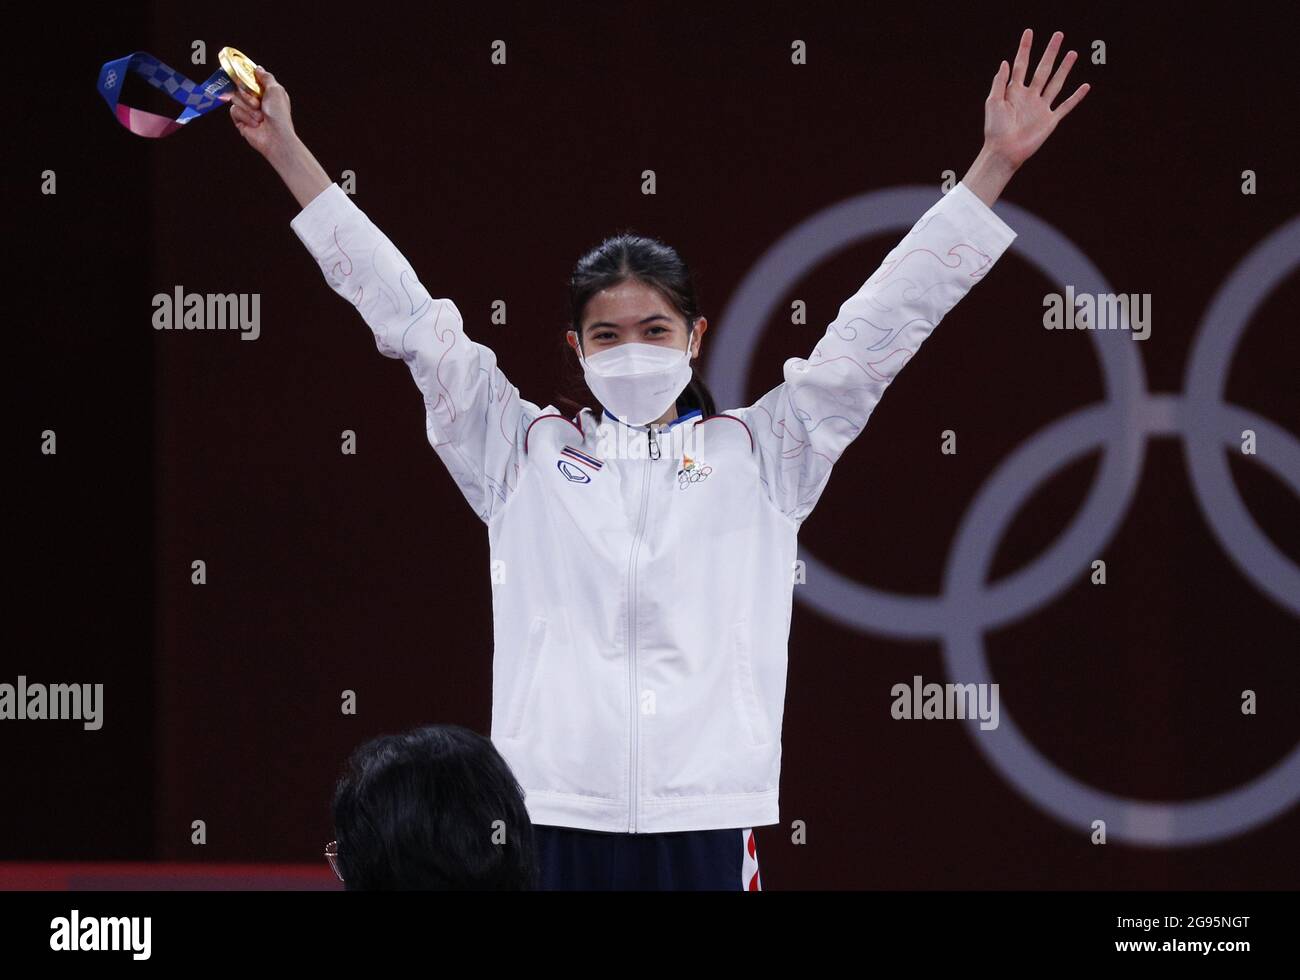 Tokyo, Japan. 24th July, 2021. Thailand's Panipak Wongpattanakit waves after wining the gold medal in Women's 49kg Taekwondo at the Tokyo Summer Olympic Games in Tokyo, Japan, on Saturday, July 24, 2021. Photo by Bob Strong/UPI. Credit: UPI/Alamy Live News Stock Photo